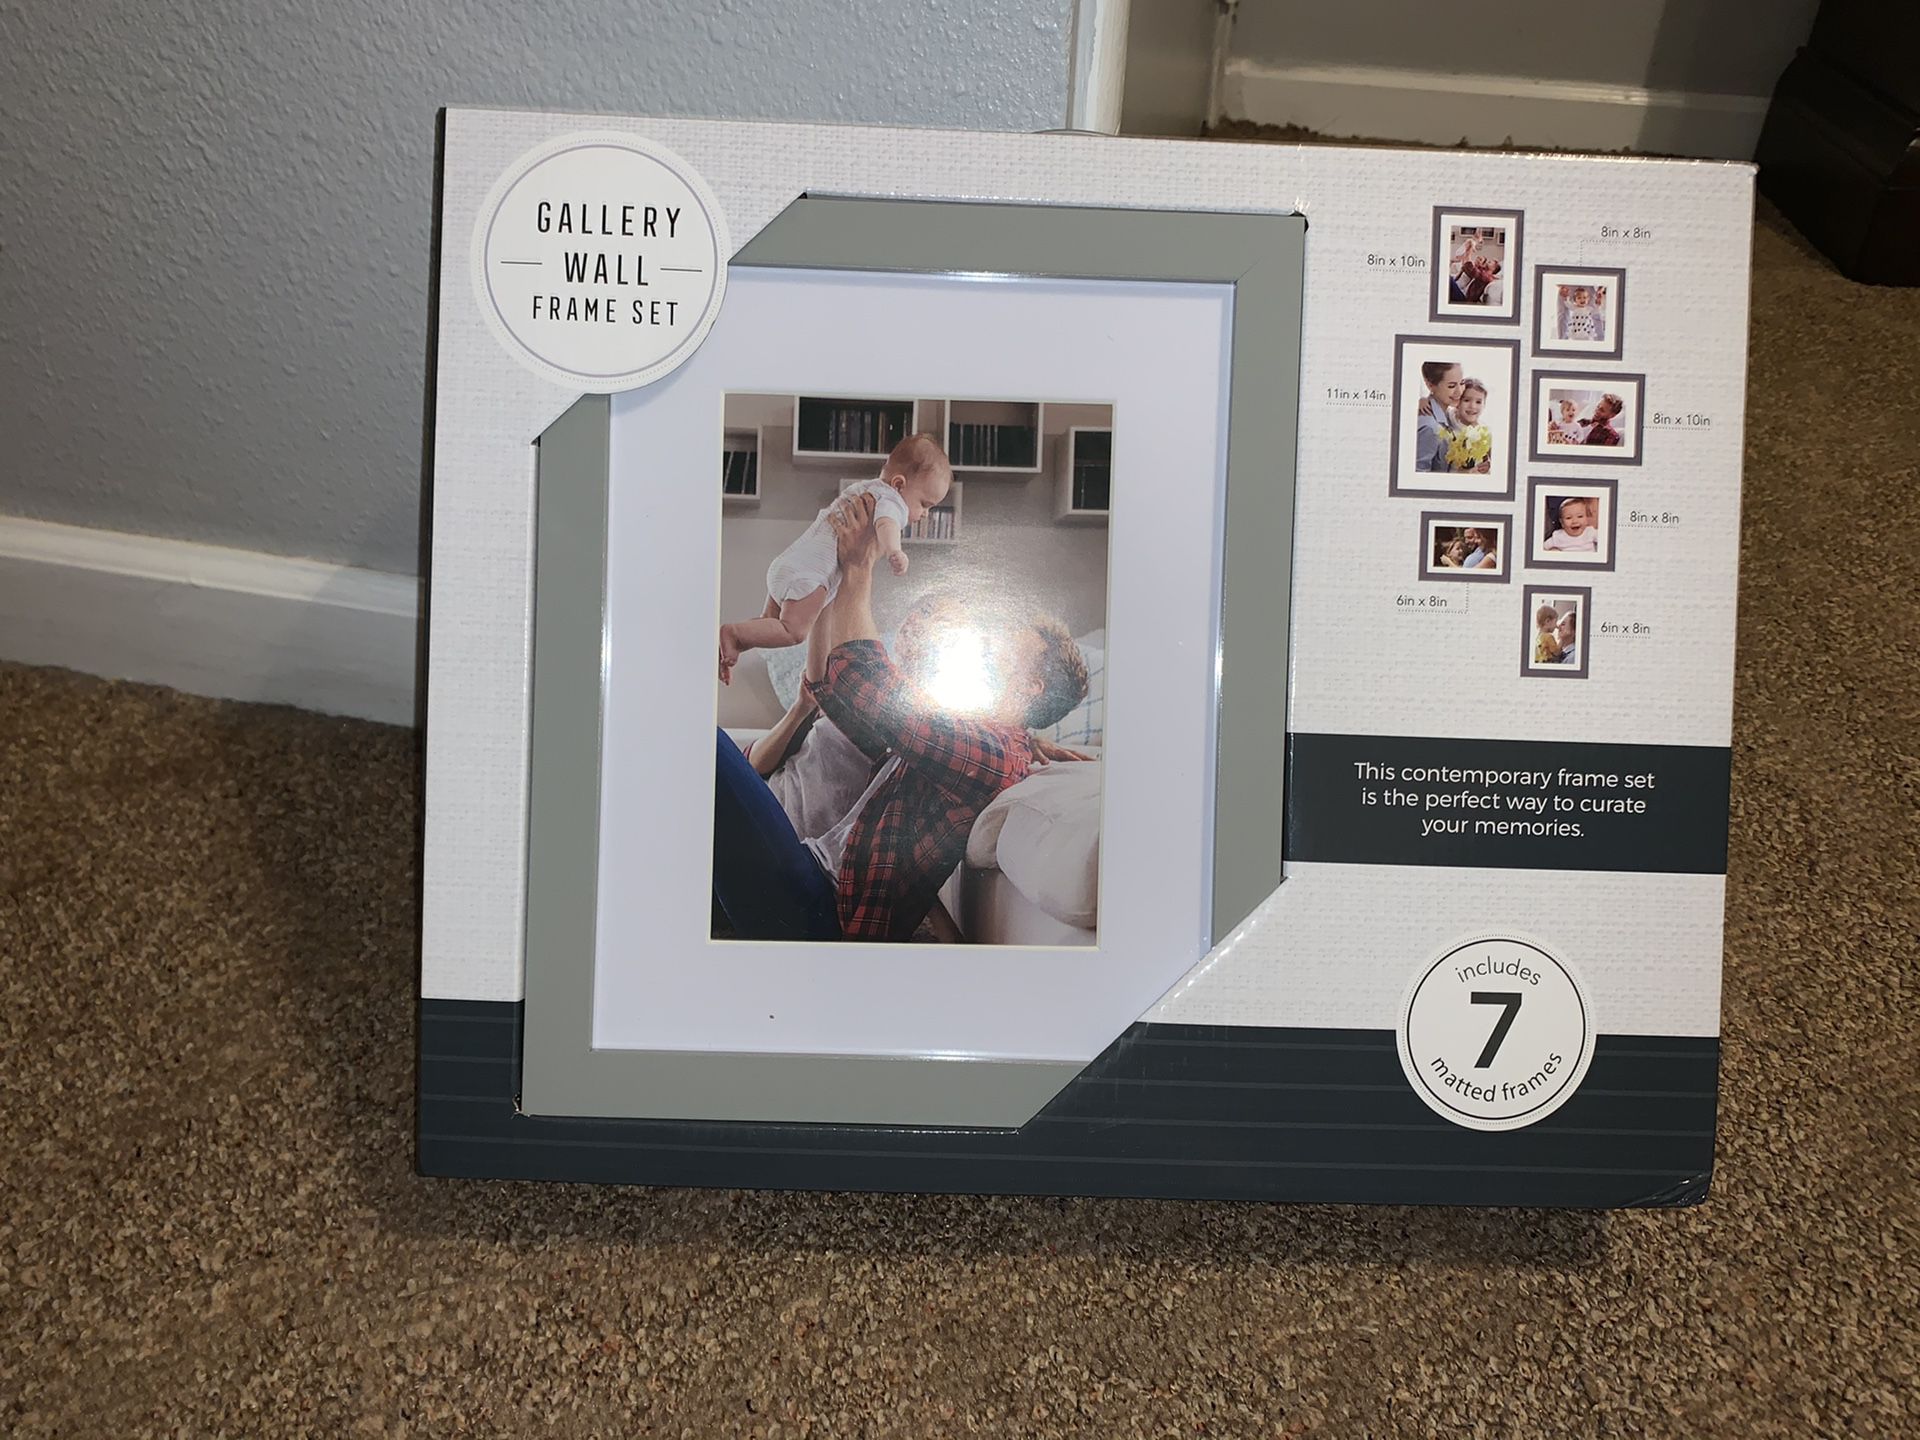 New picture frames